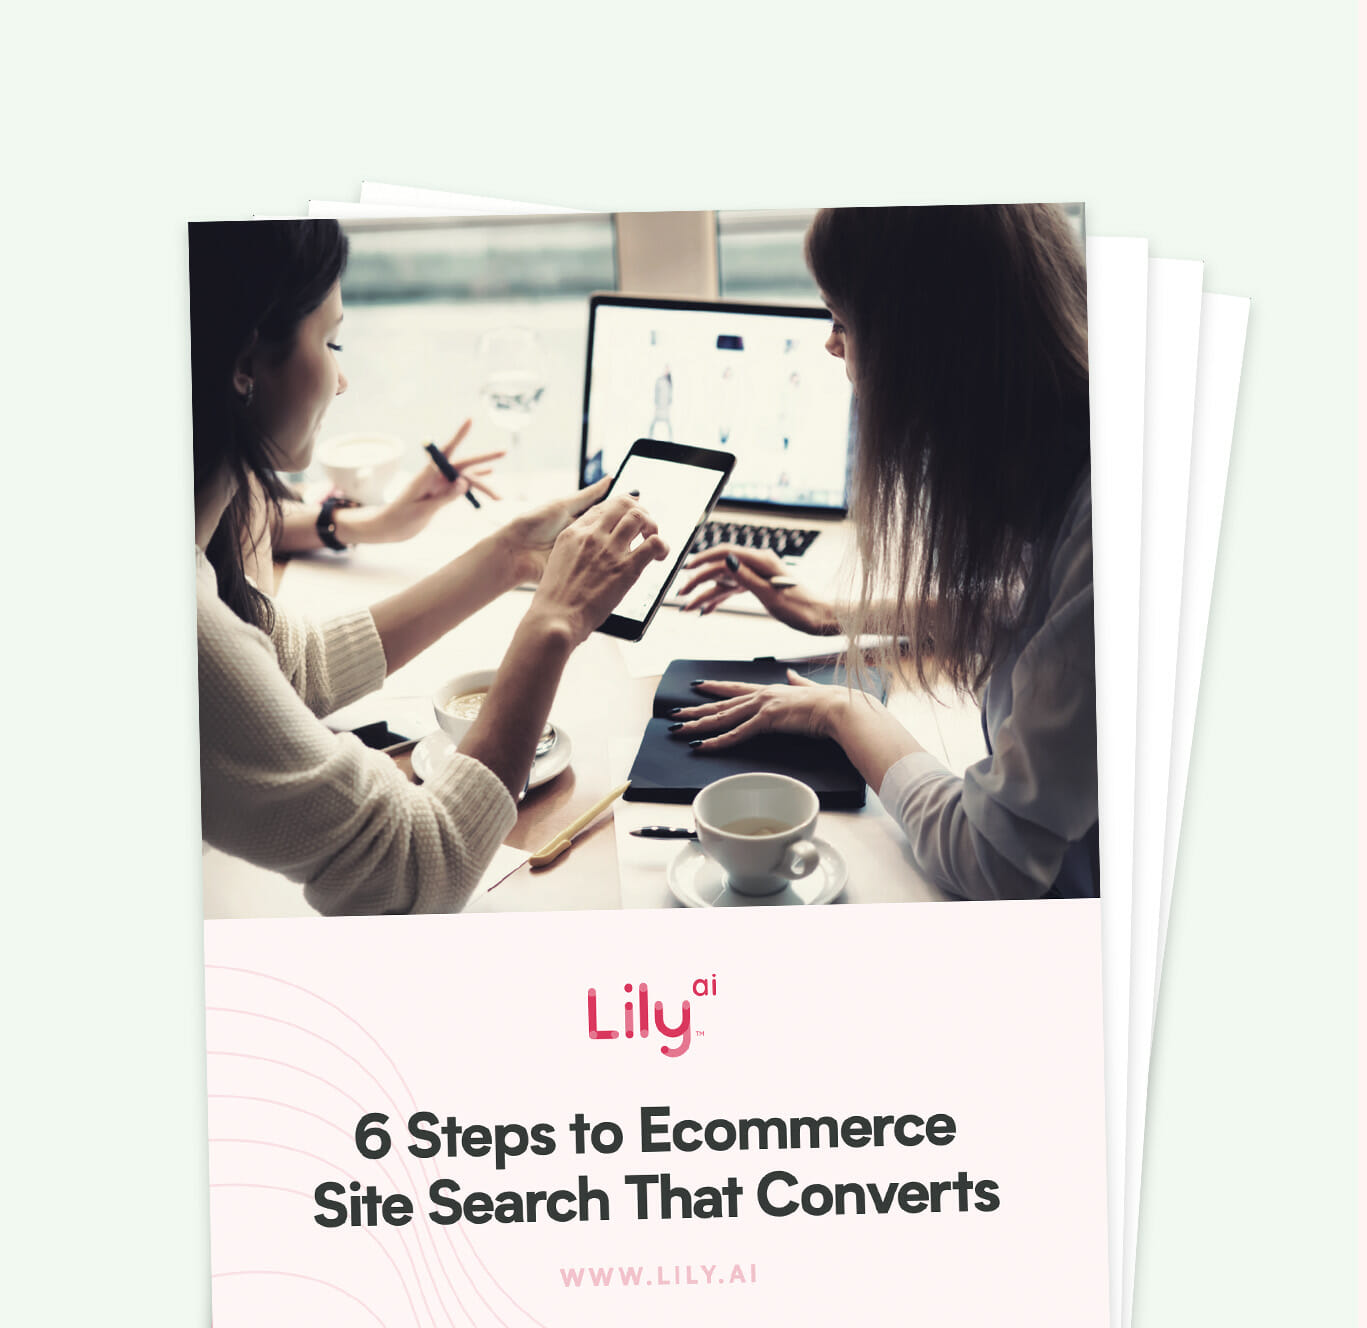 Preview of Lily AI's "6 Steps to E-Commerce Site Search that Converts" Downloadable Guide Book.